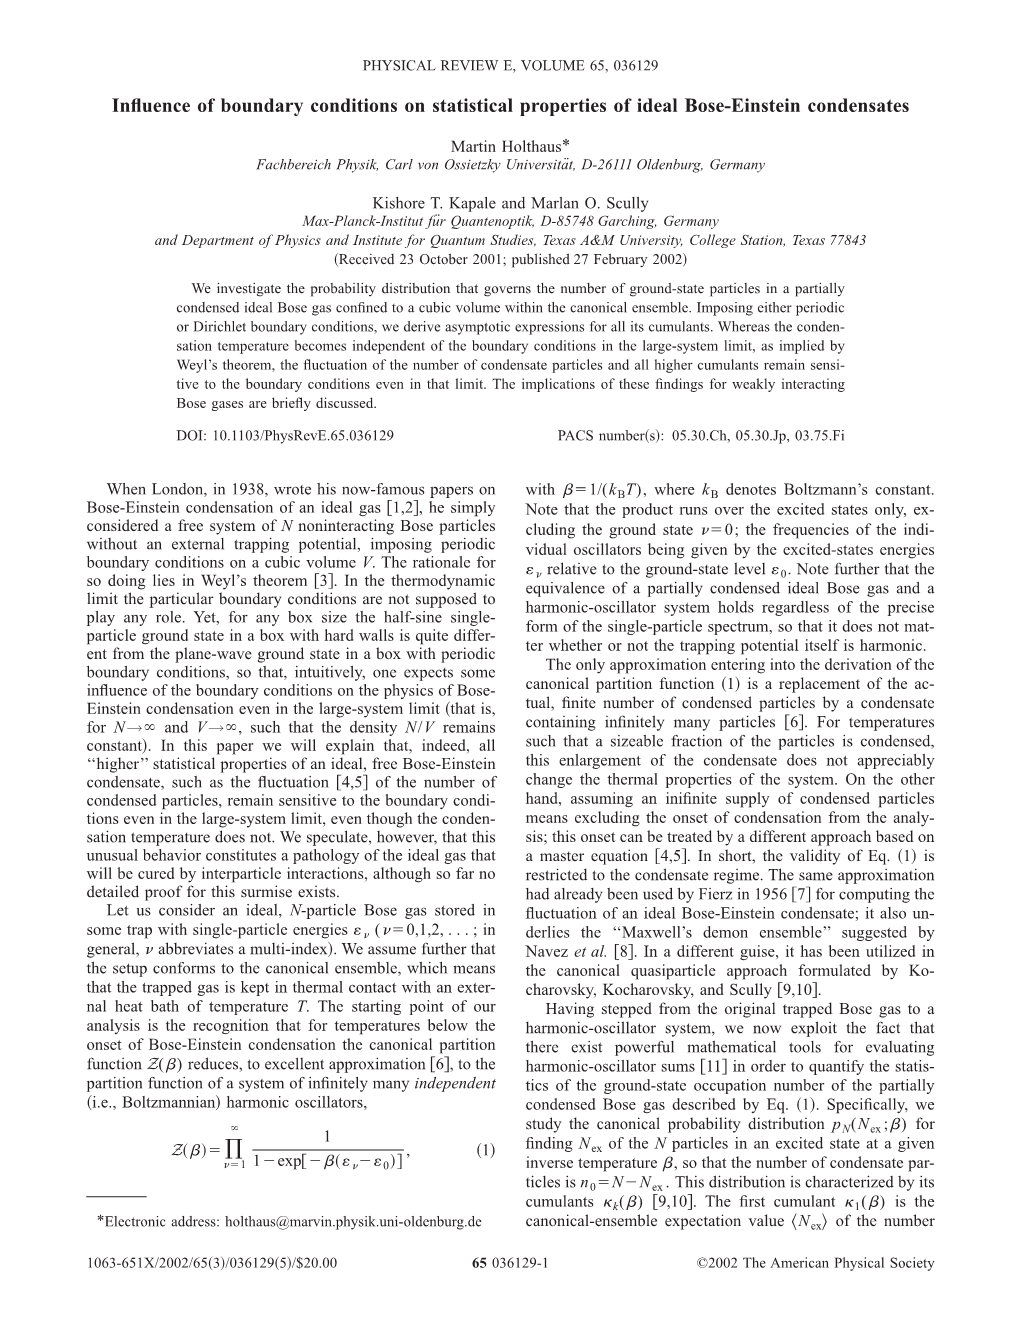 Influence of Boundary Conditions on Statistical Properties of Ideal Bose